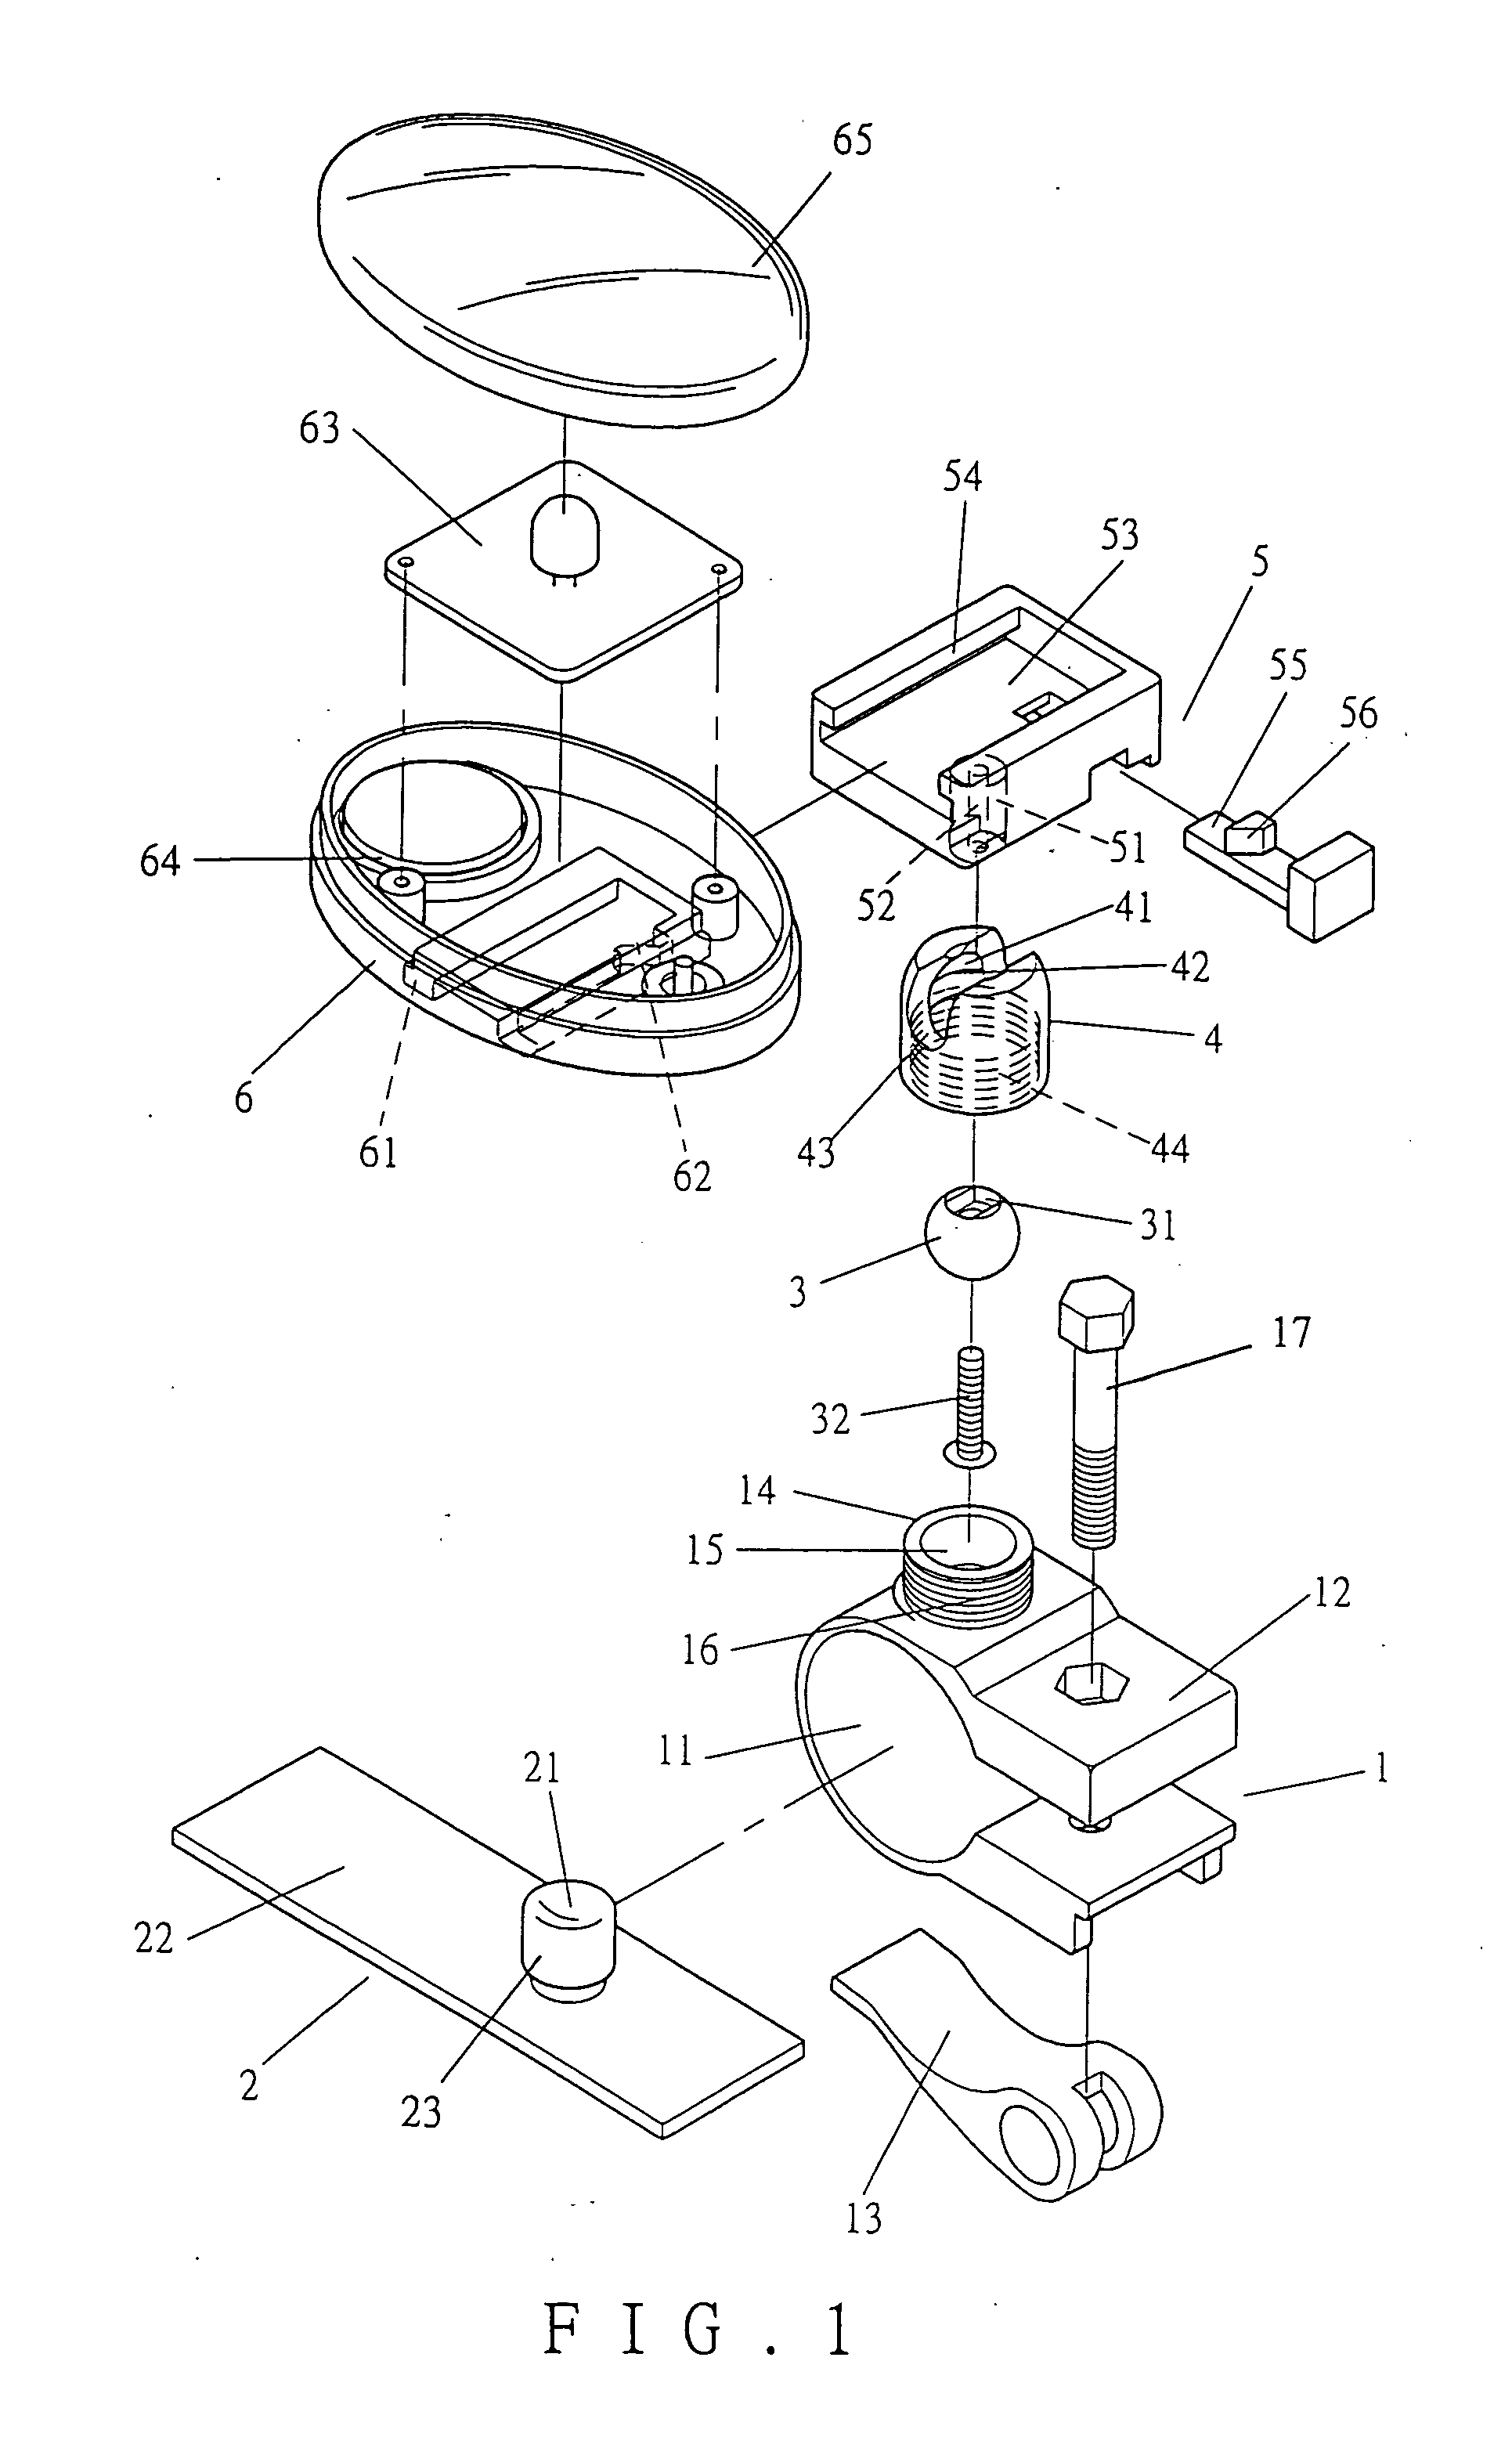 Adjustable attachment device for attaching an object to a tubular member